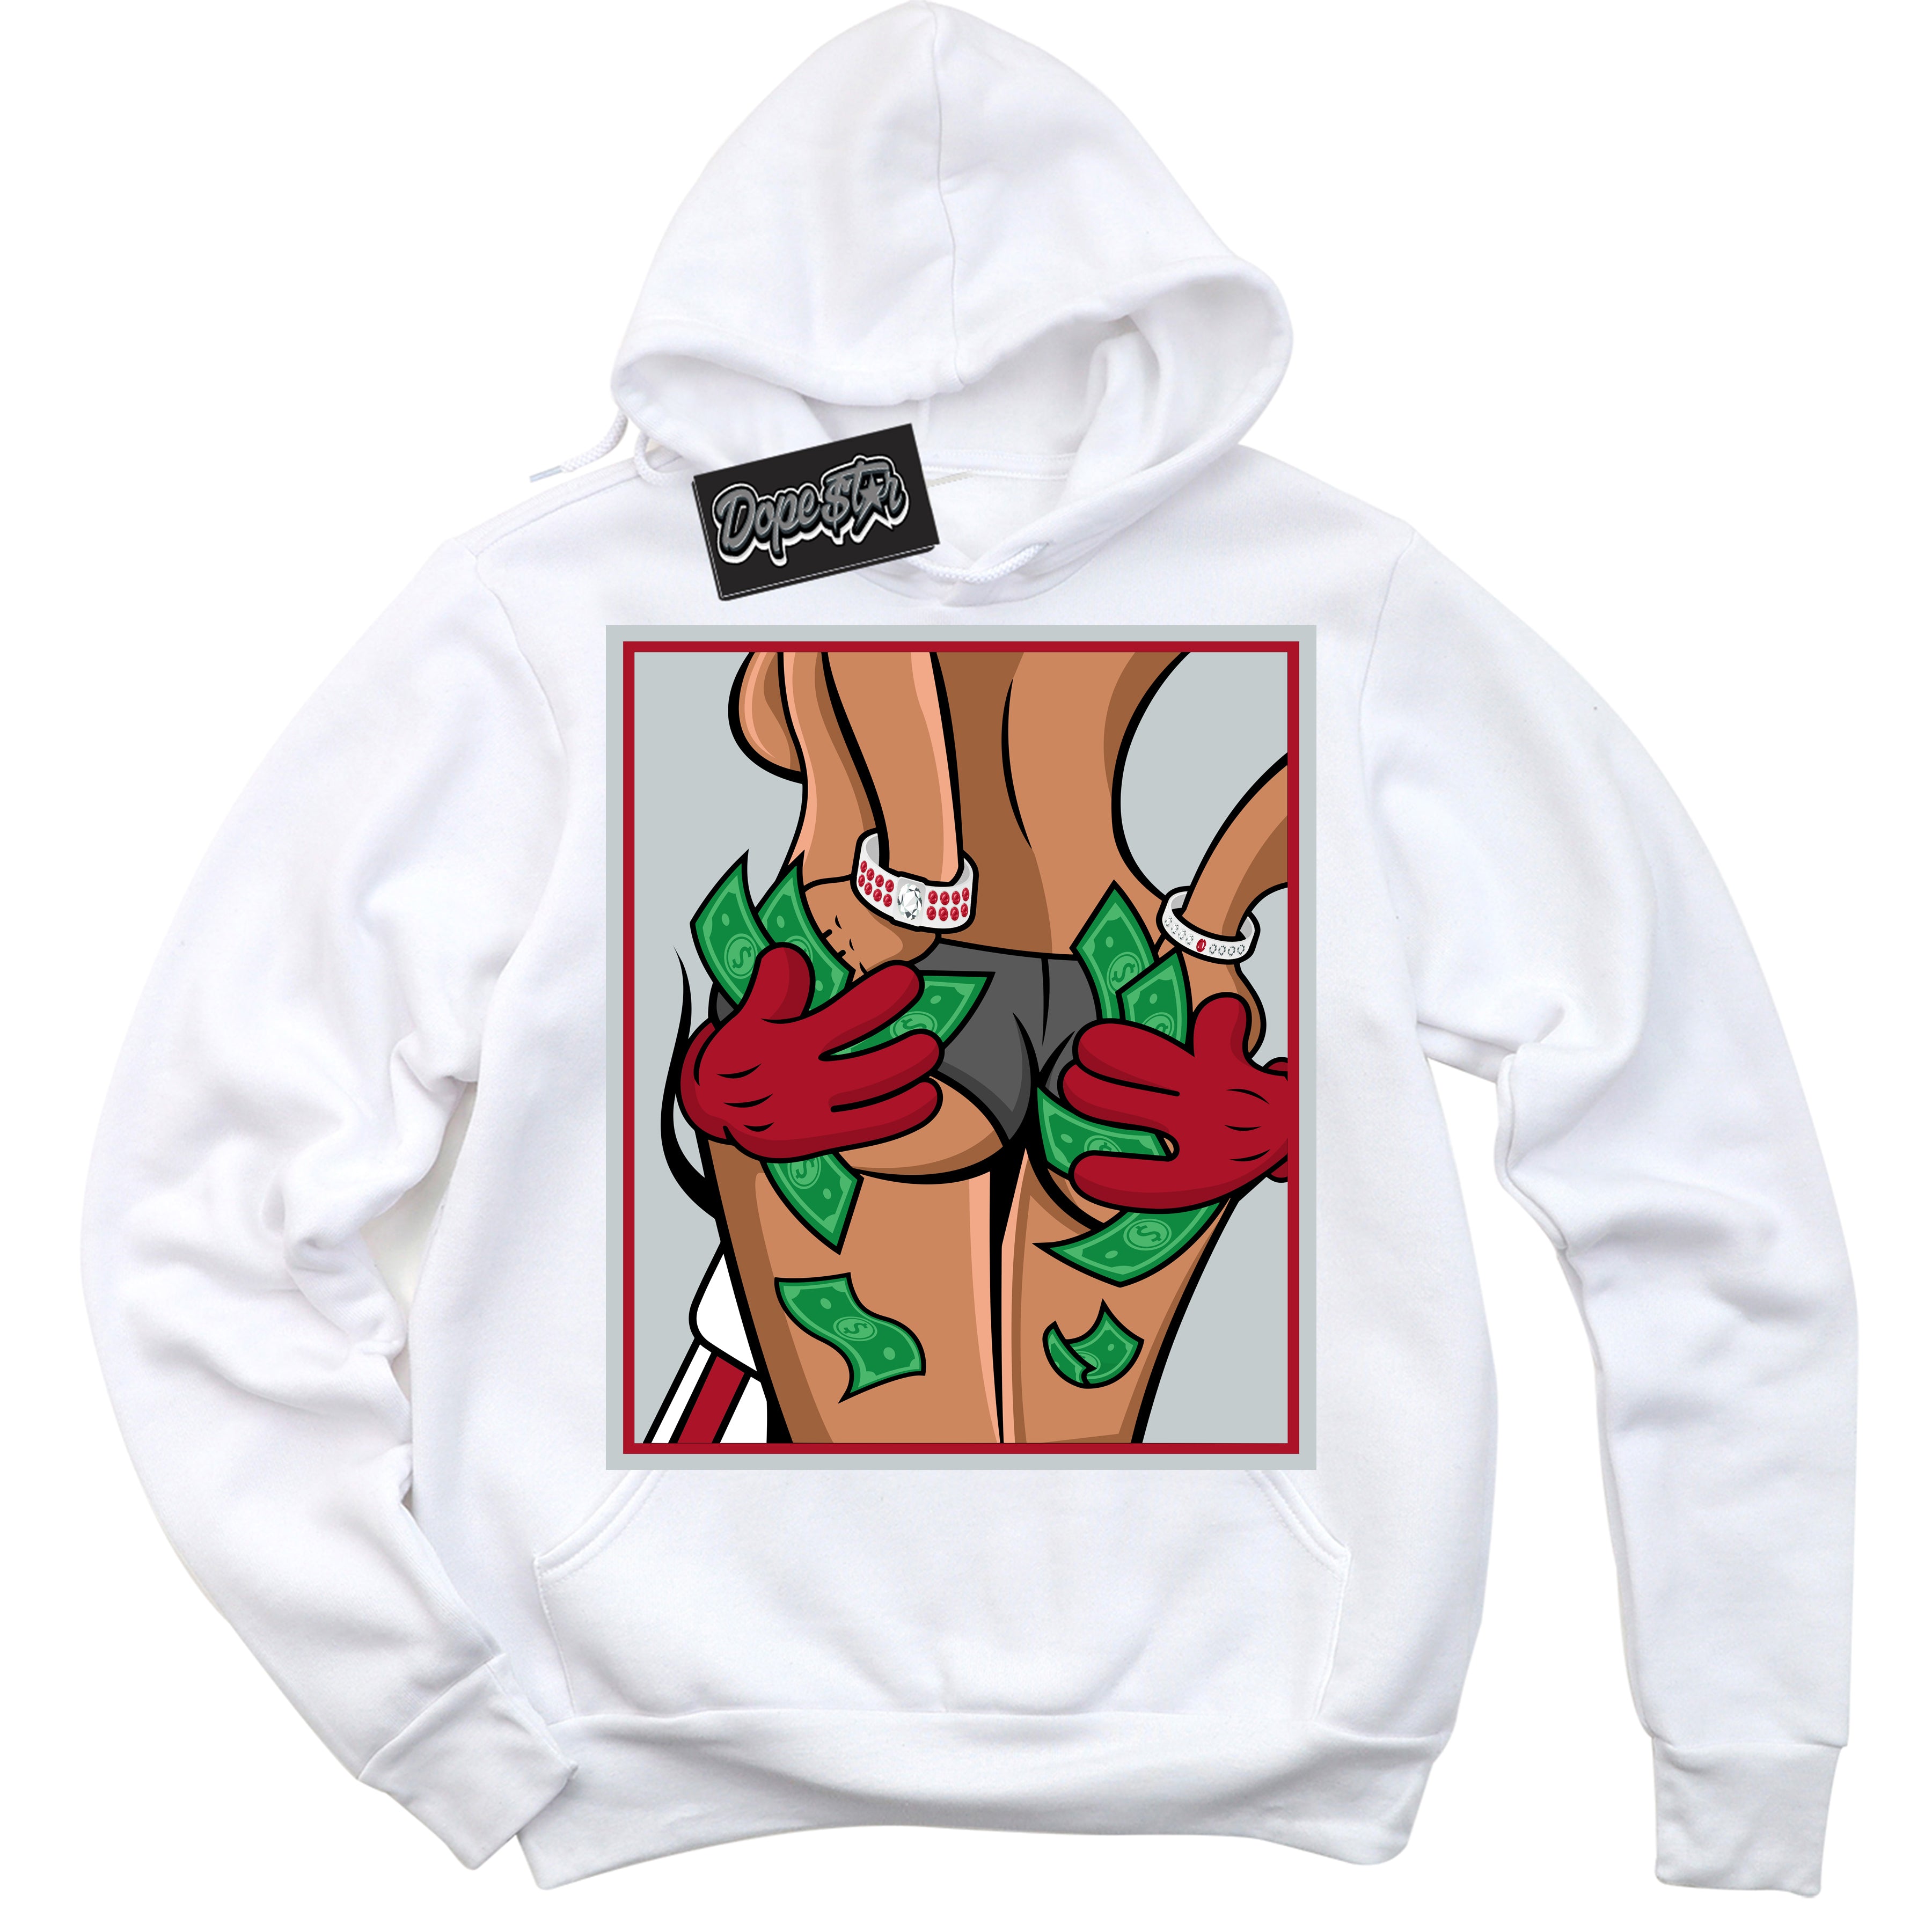 Cool Black Hoodie with “ Money Hands ”  design that Perfectly Matches  Reverse Ultraman Sneakers.